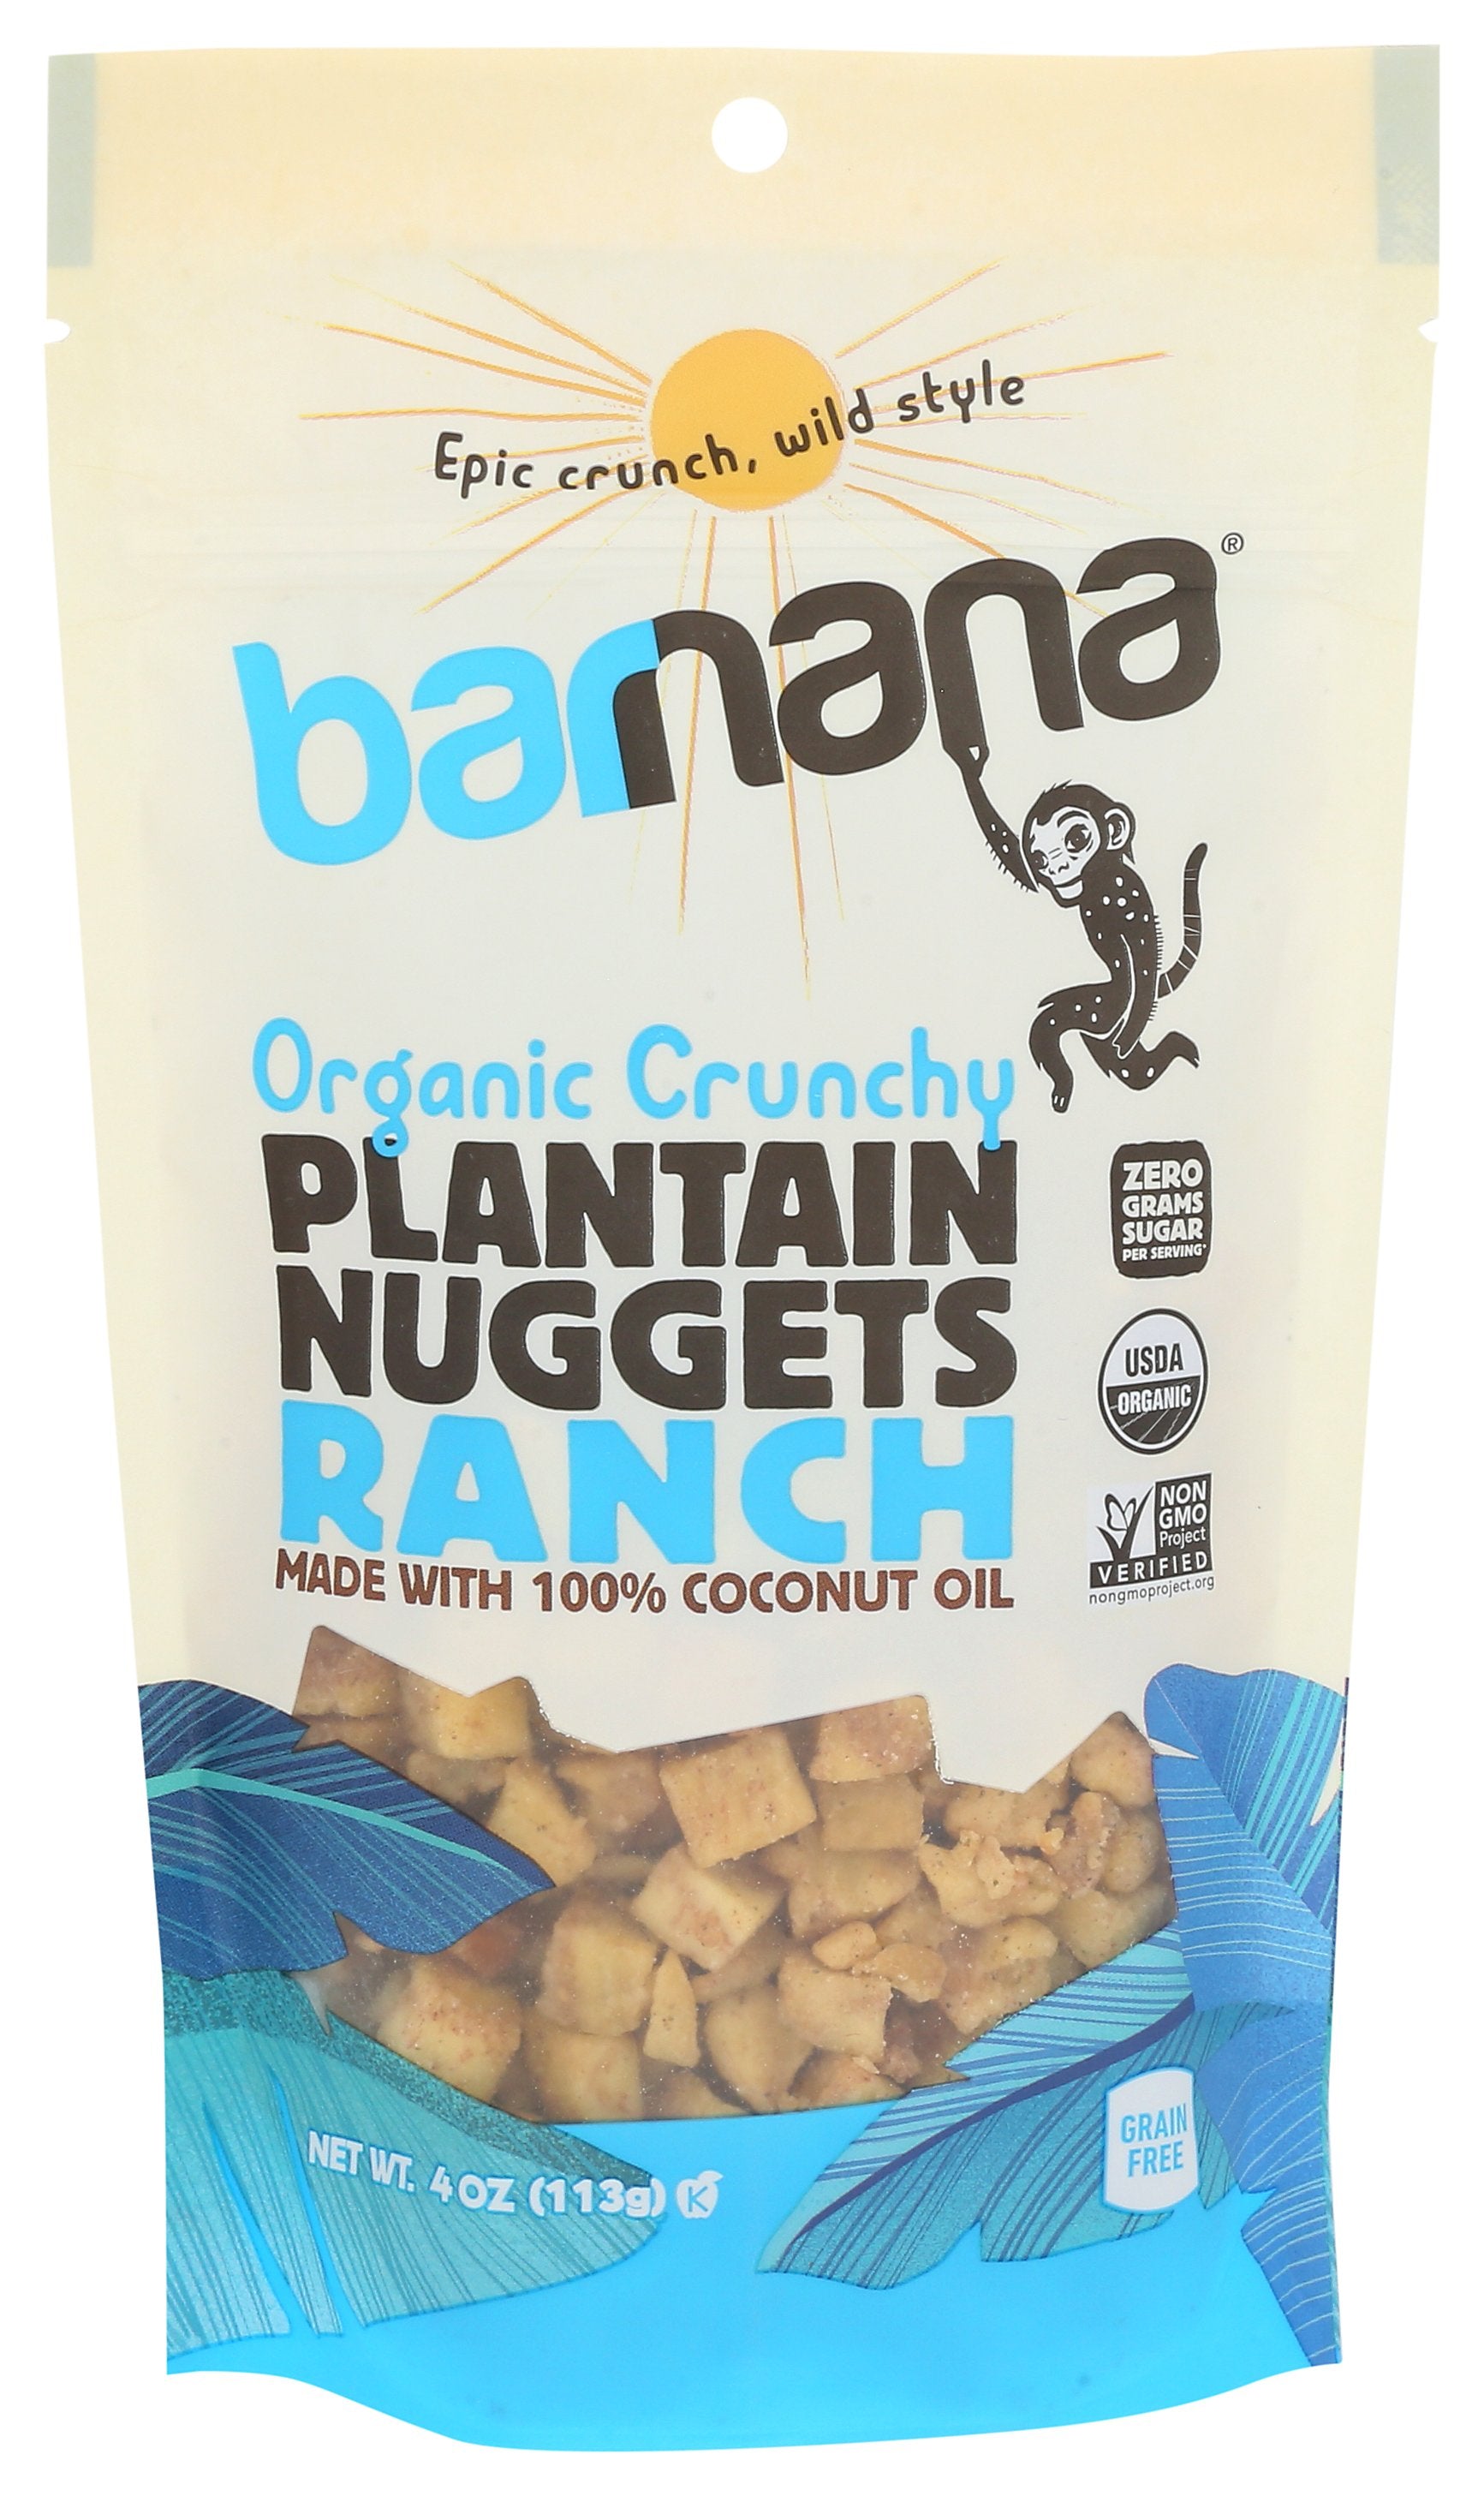 BARNANA NUGGETS PLNTAIN RNCH ORG - Case of 6